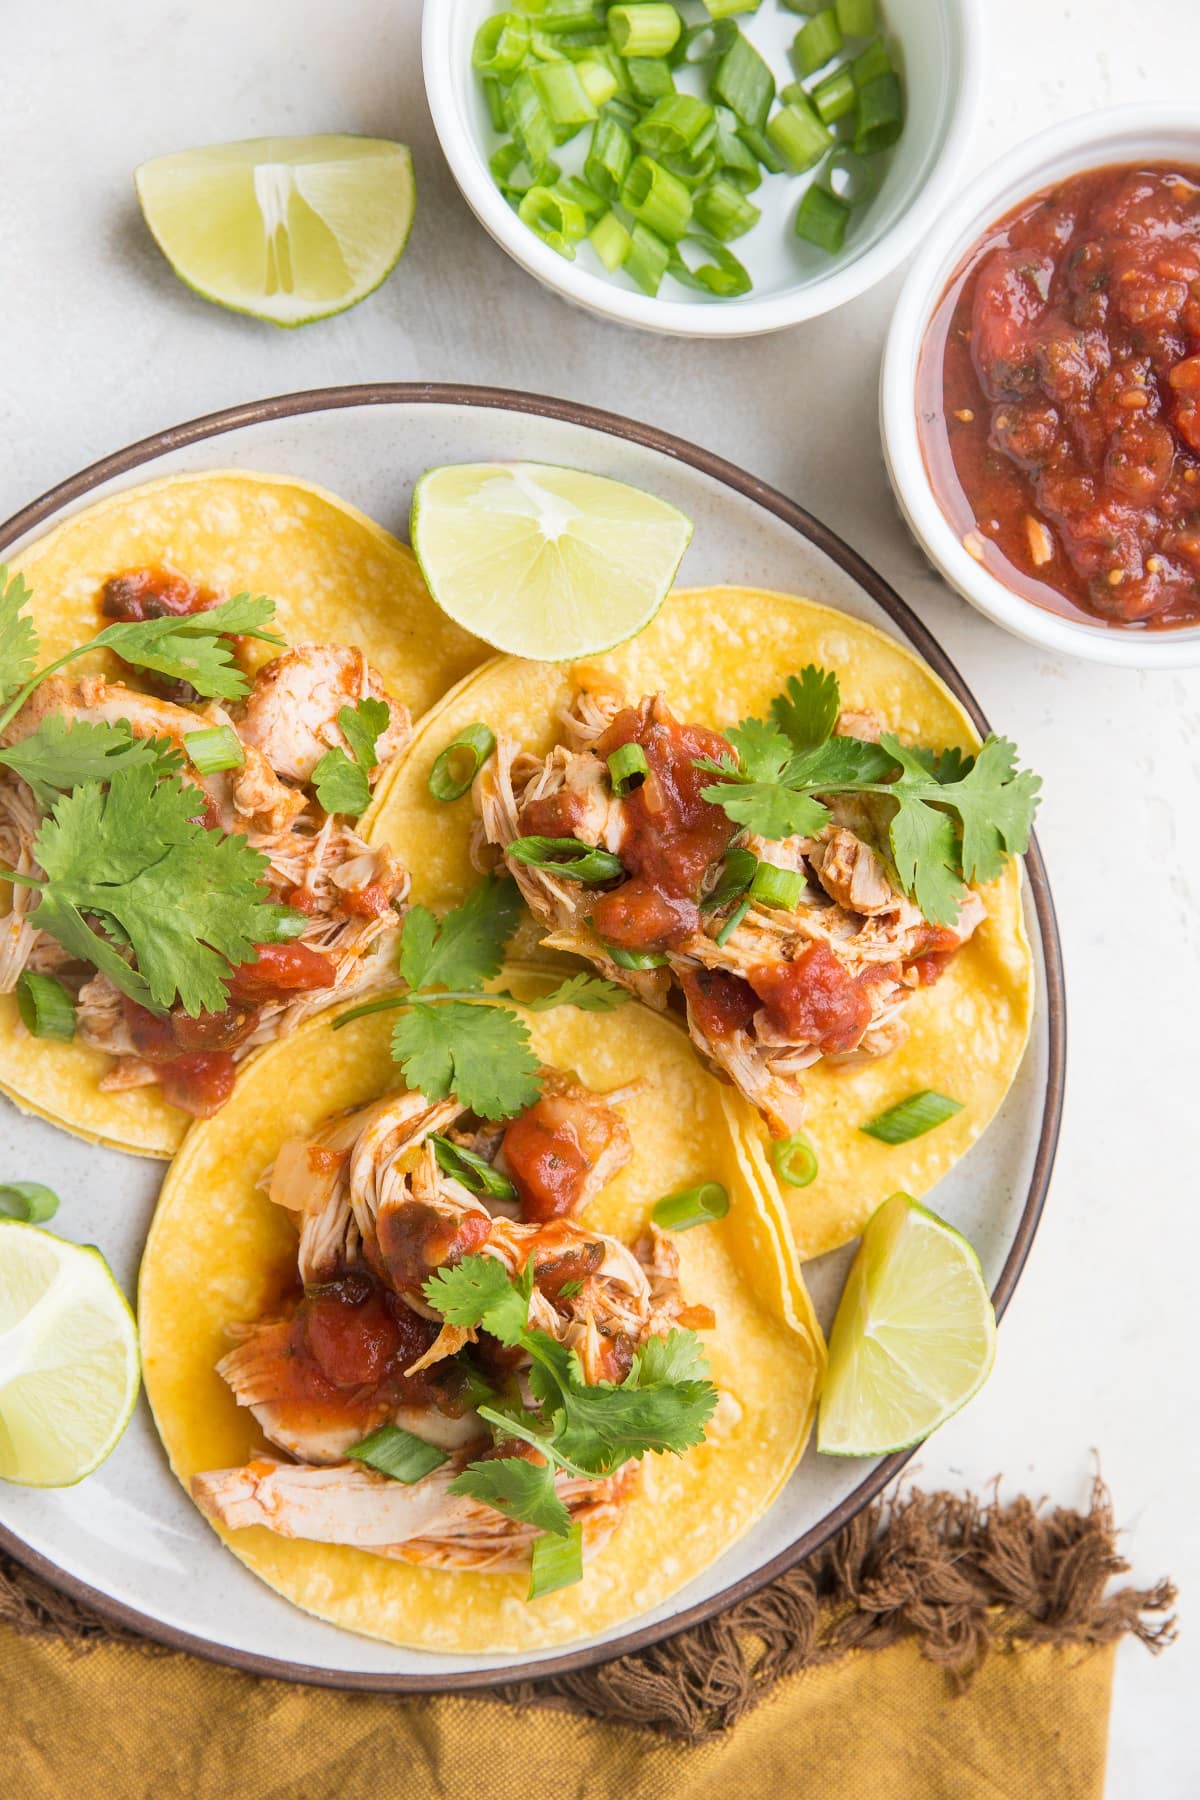 Instant Pot Chicken Tacos with perfectly tender shredded chicken is so easy to prepare and perfect any time a taco craving strikes!